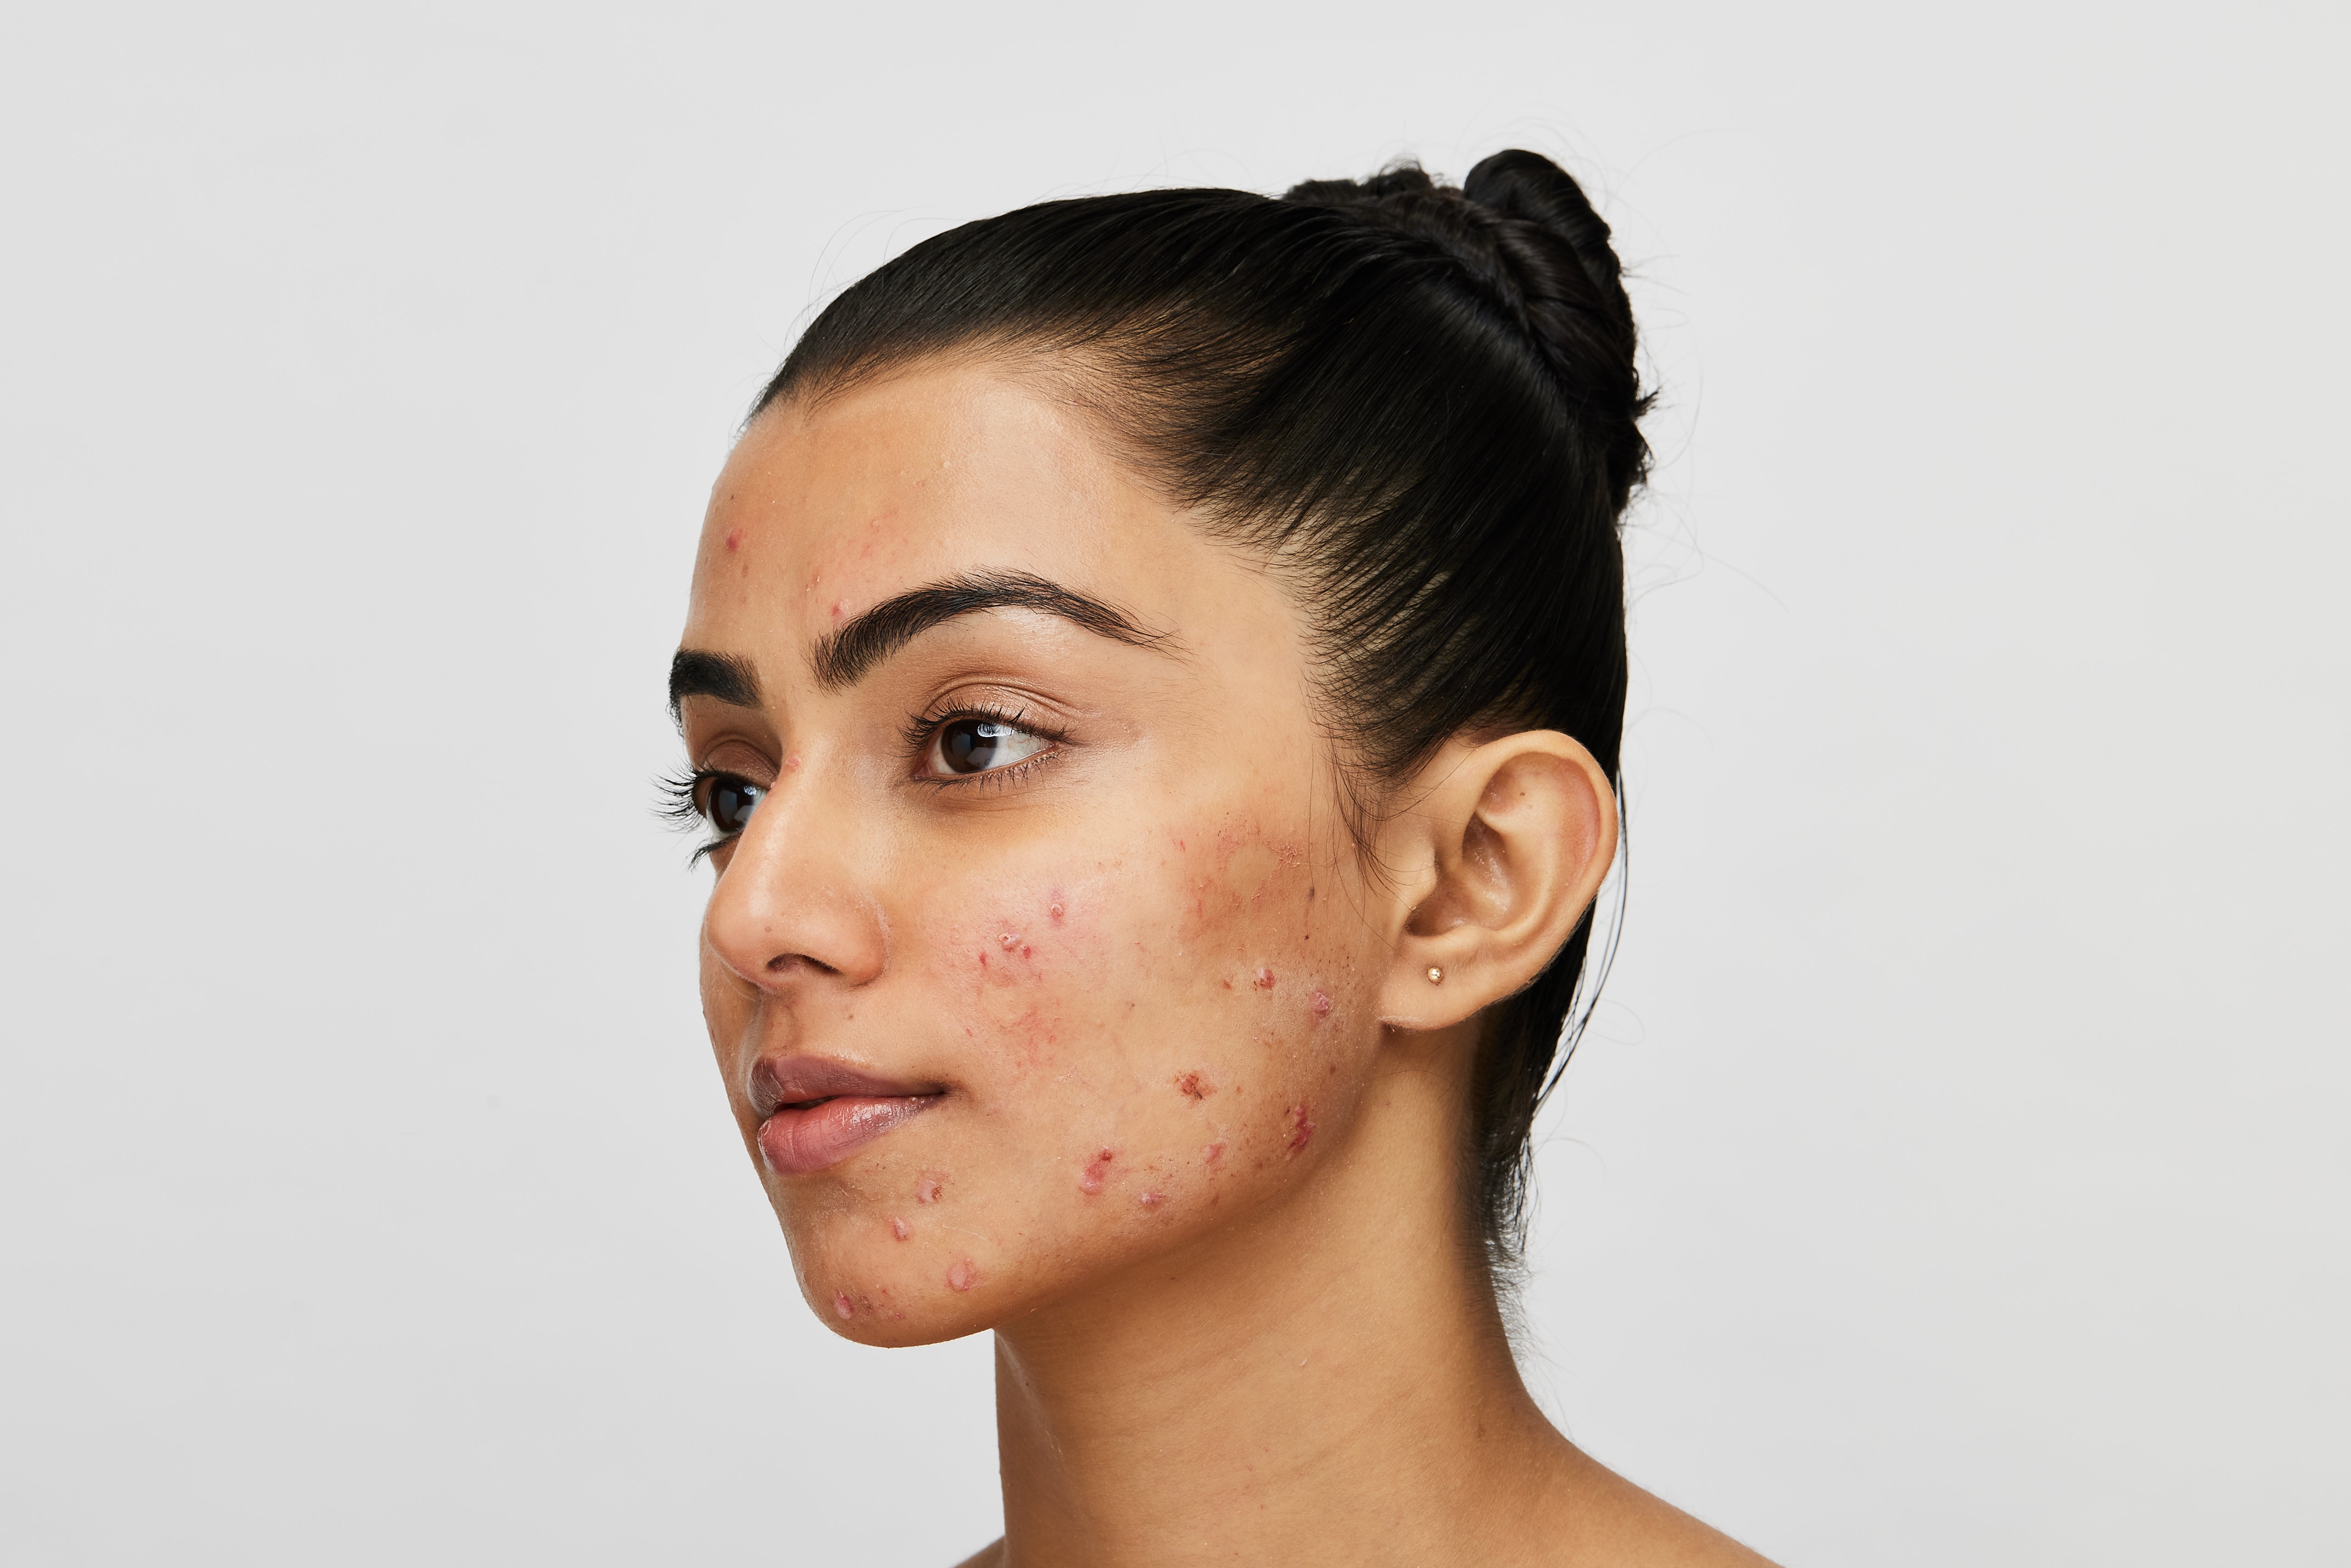 Recurring acne: Fight it with high-science solutions